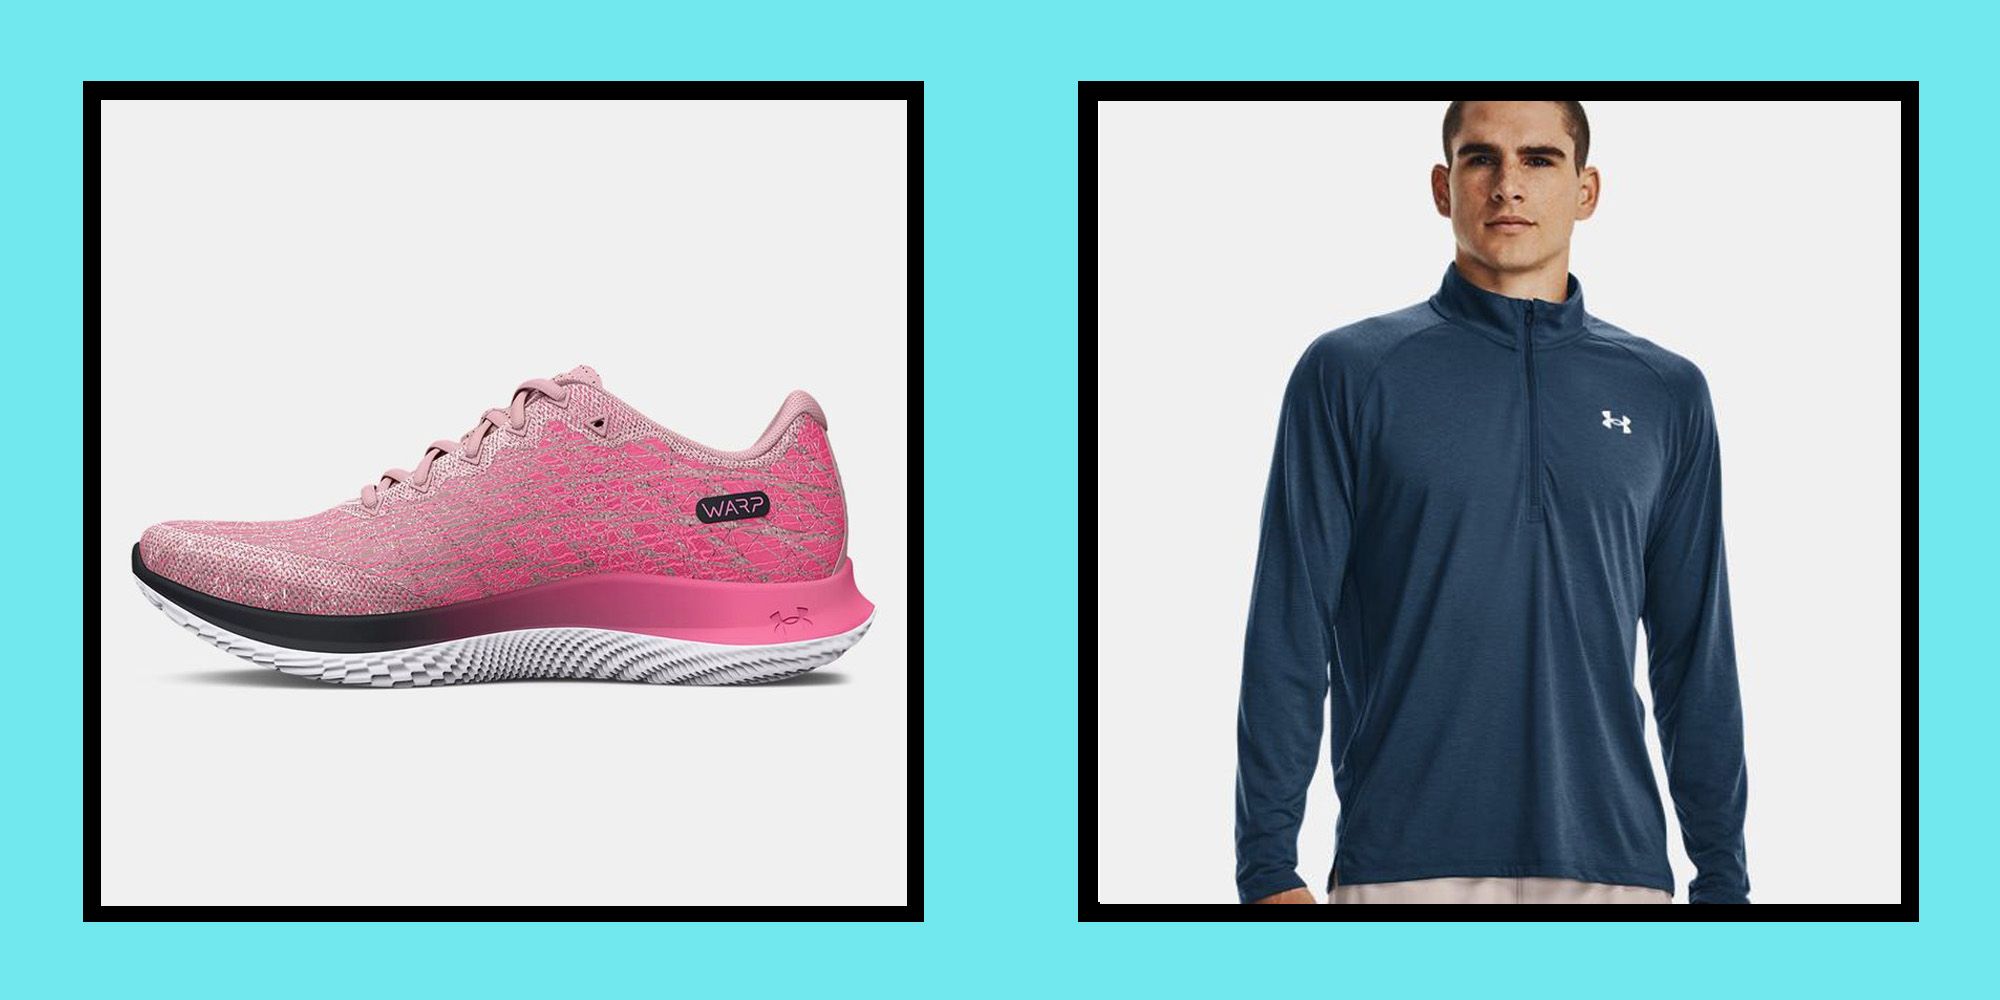 The best for runners in the Under Armour Cyber sale